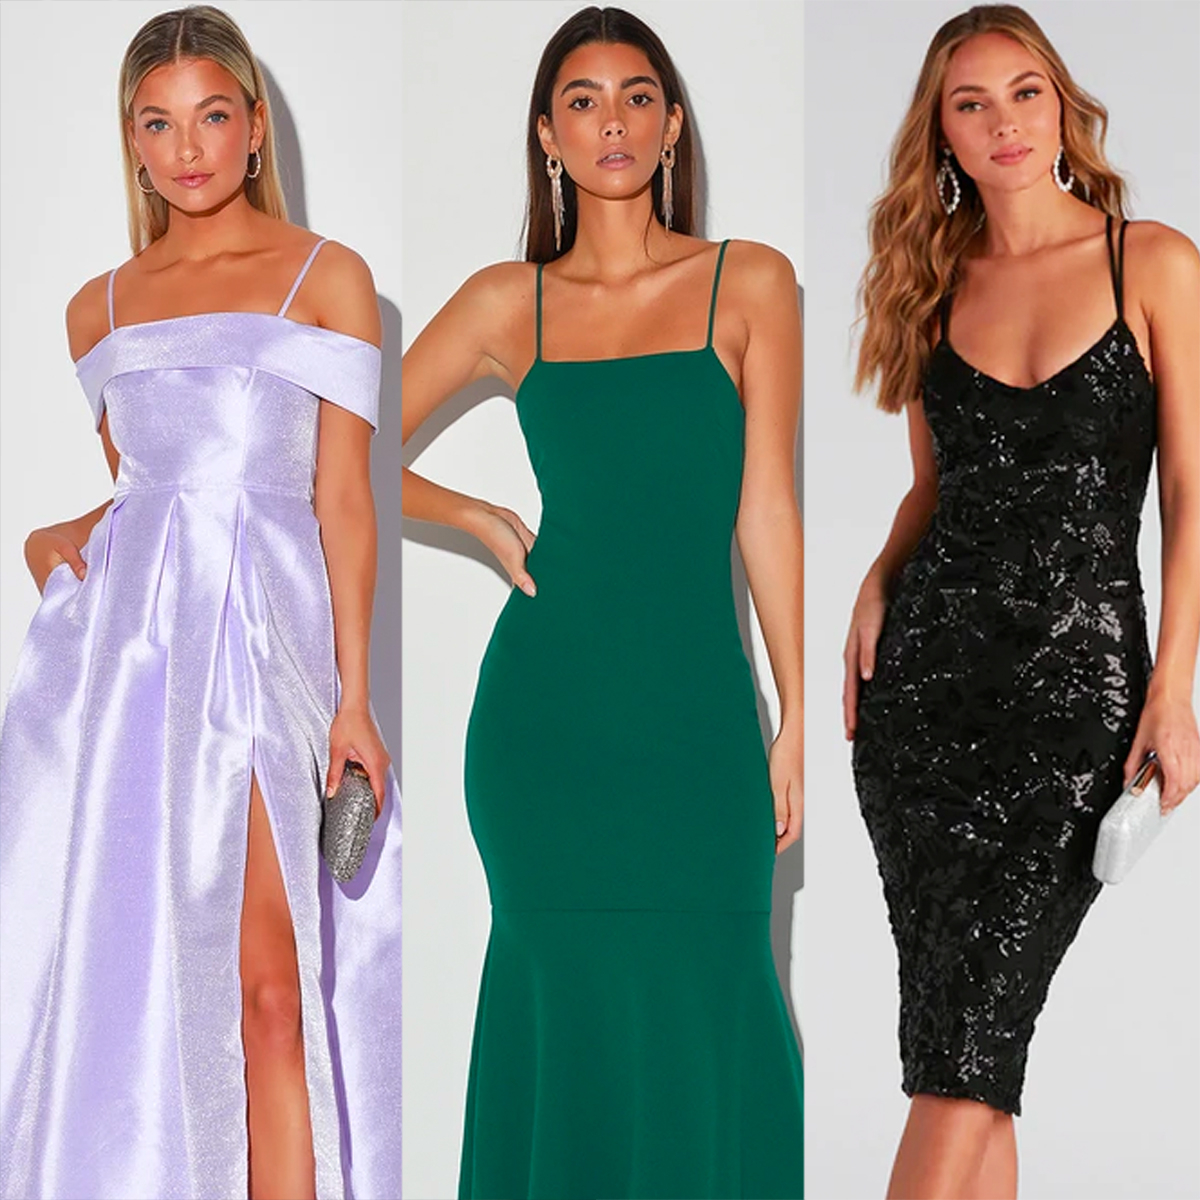 Affordable Prom Dresses: The 20 Best Deals Under $100 - WireFan - Your ...